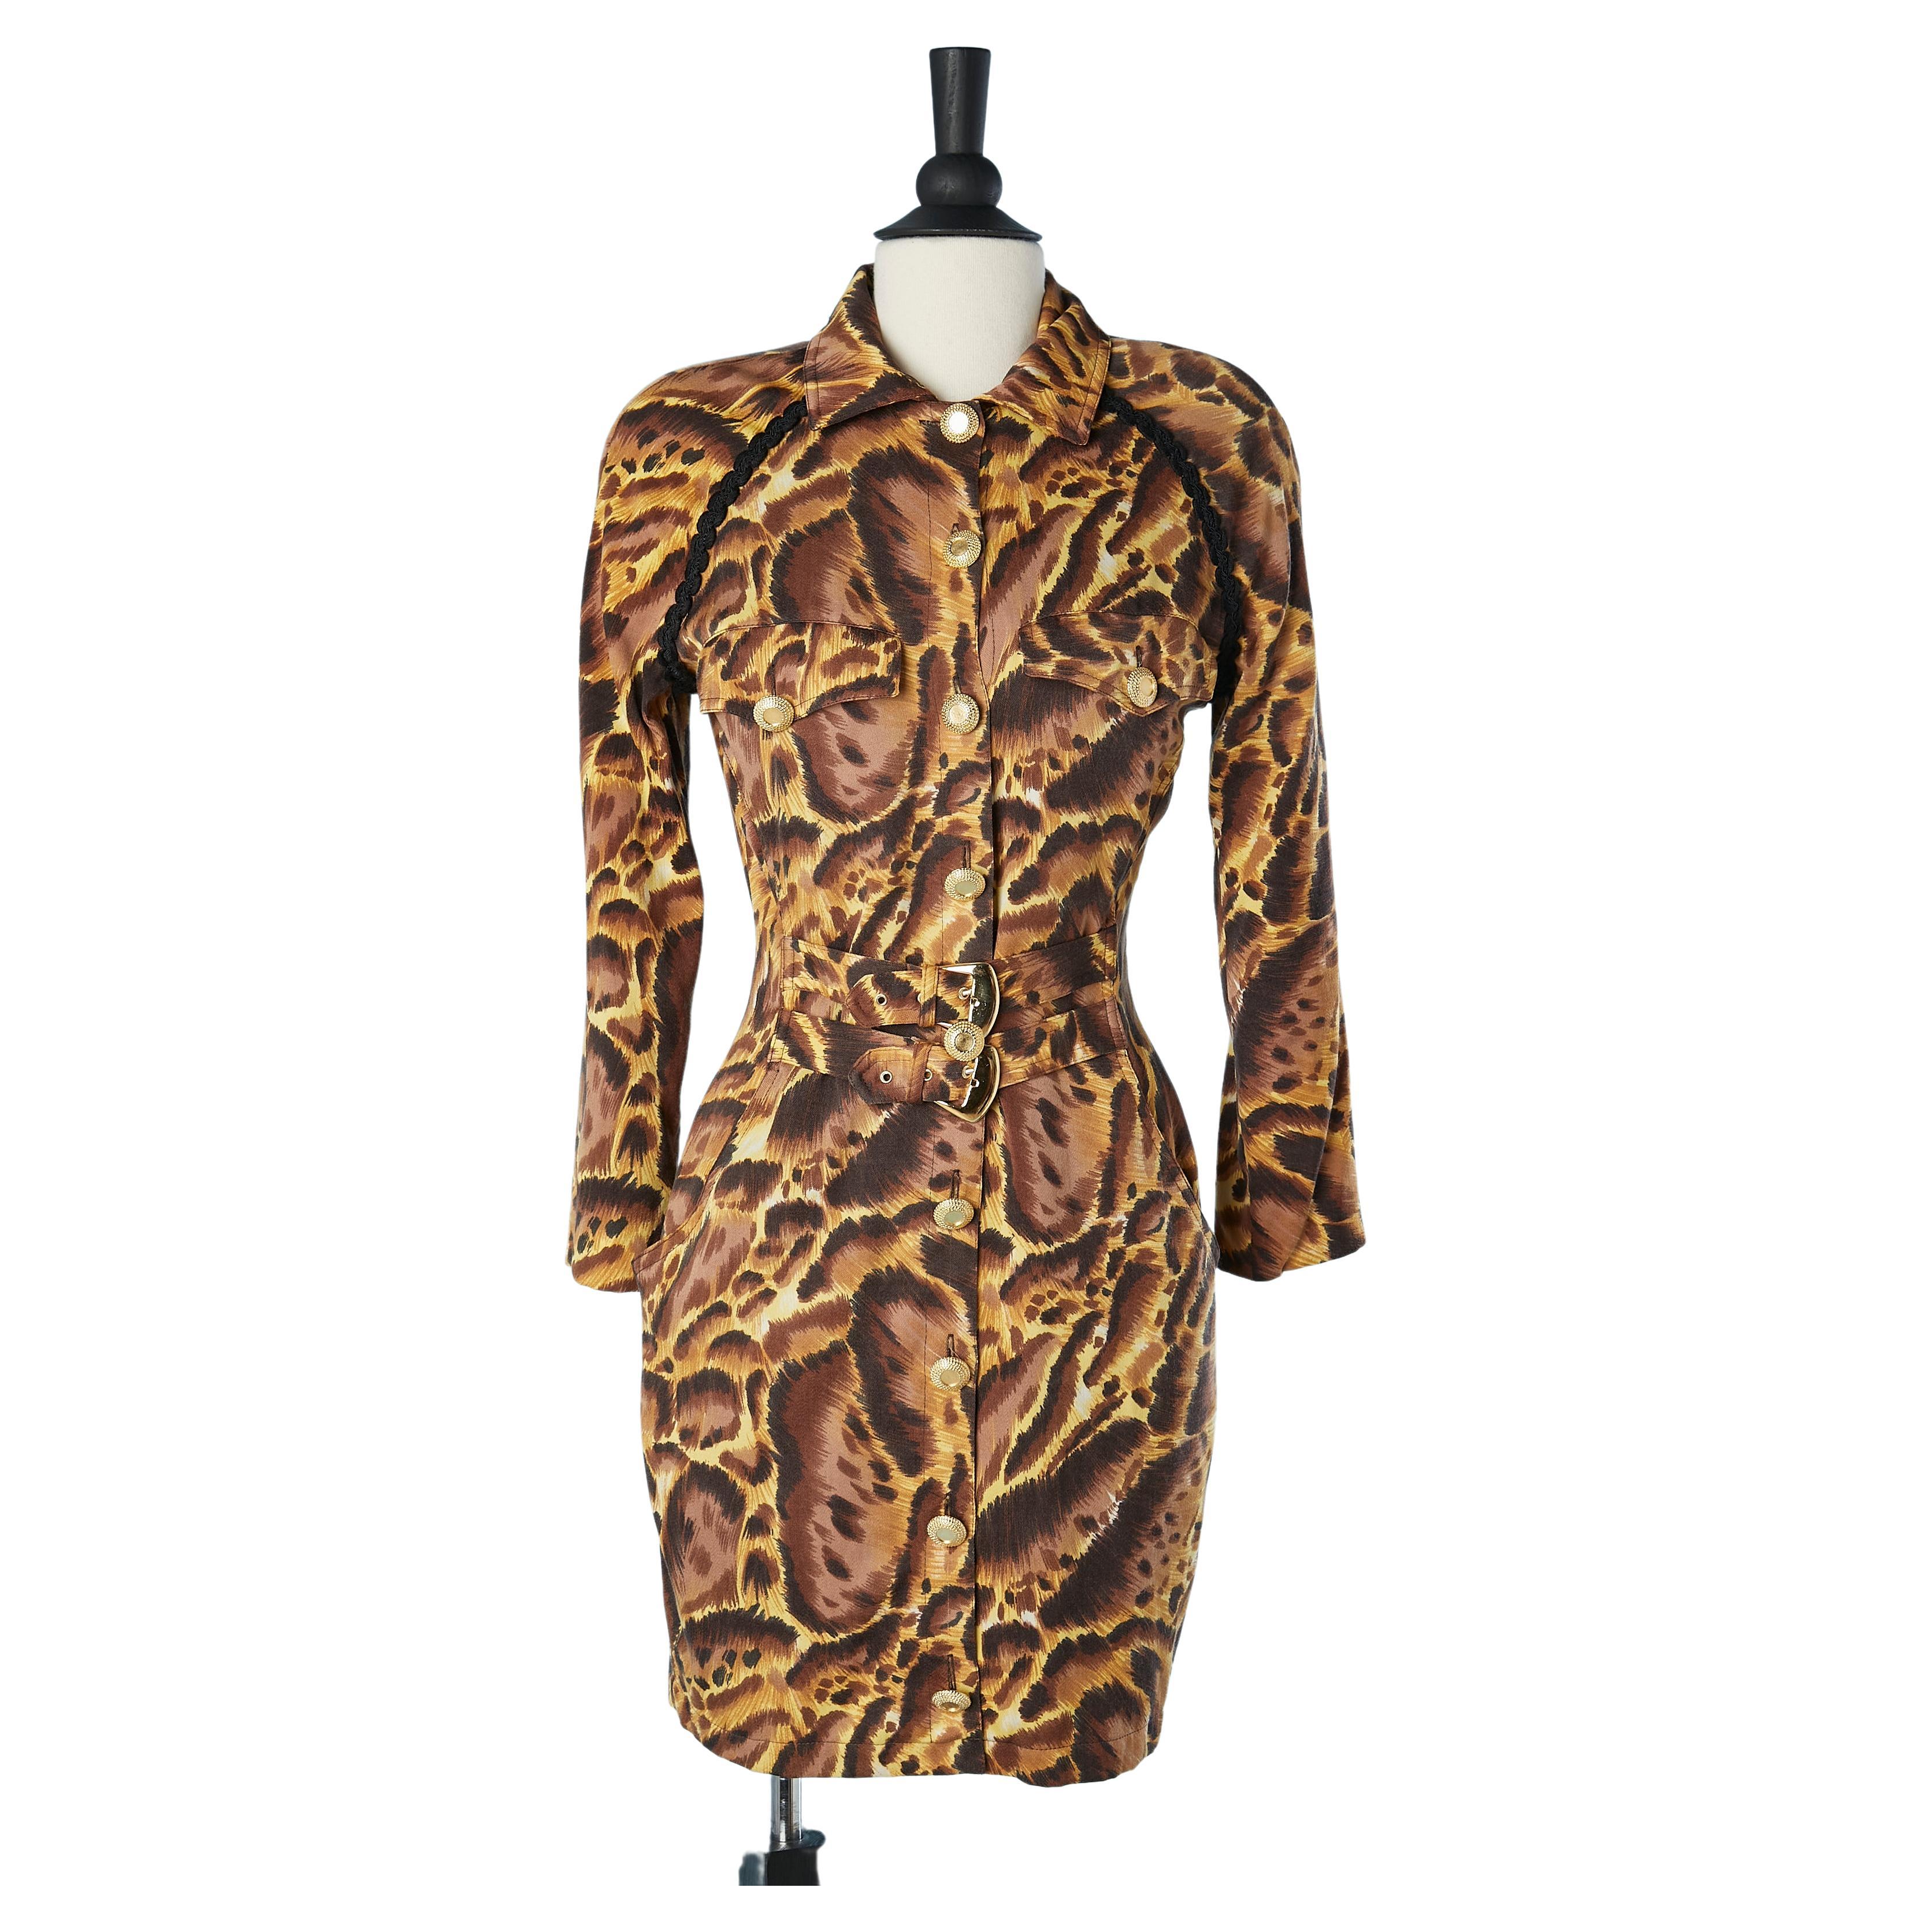 Leopard printed dress with gold button and buckles Versus Gianni Versace  For Sale at 1stDibs